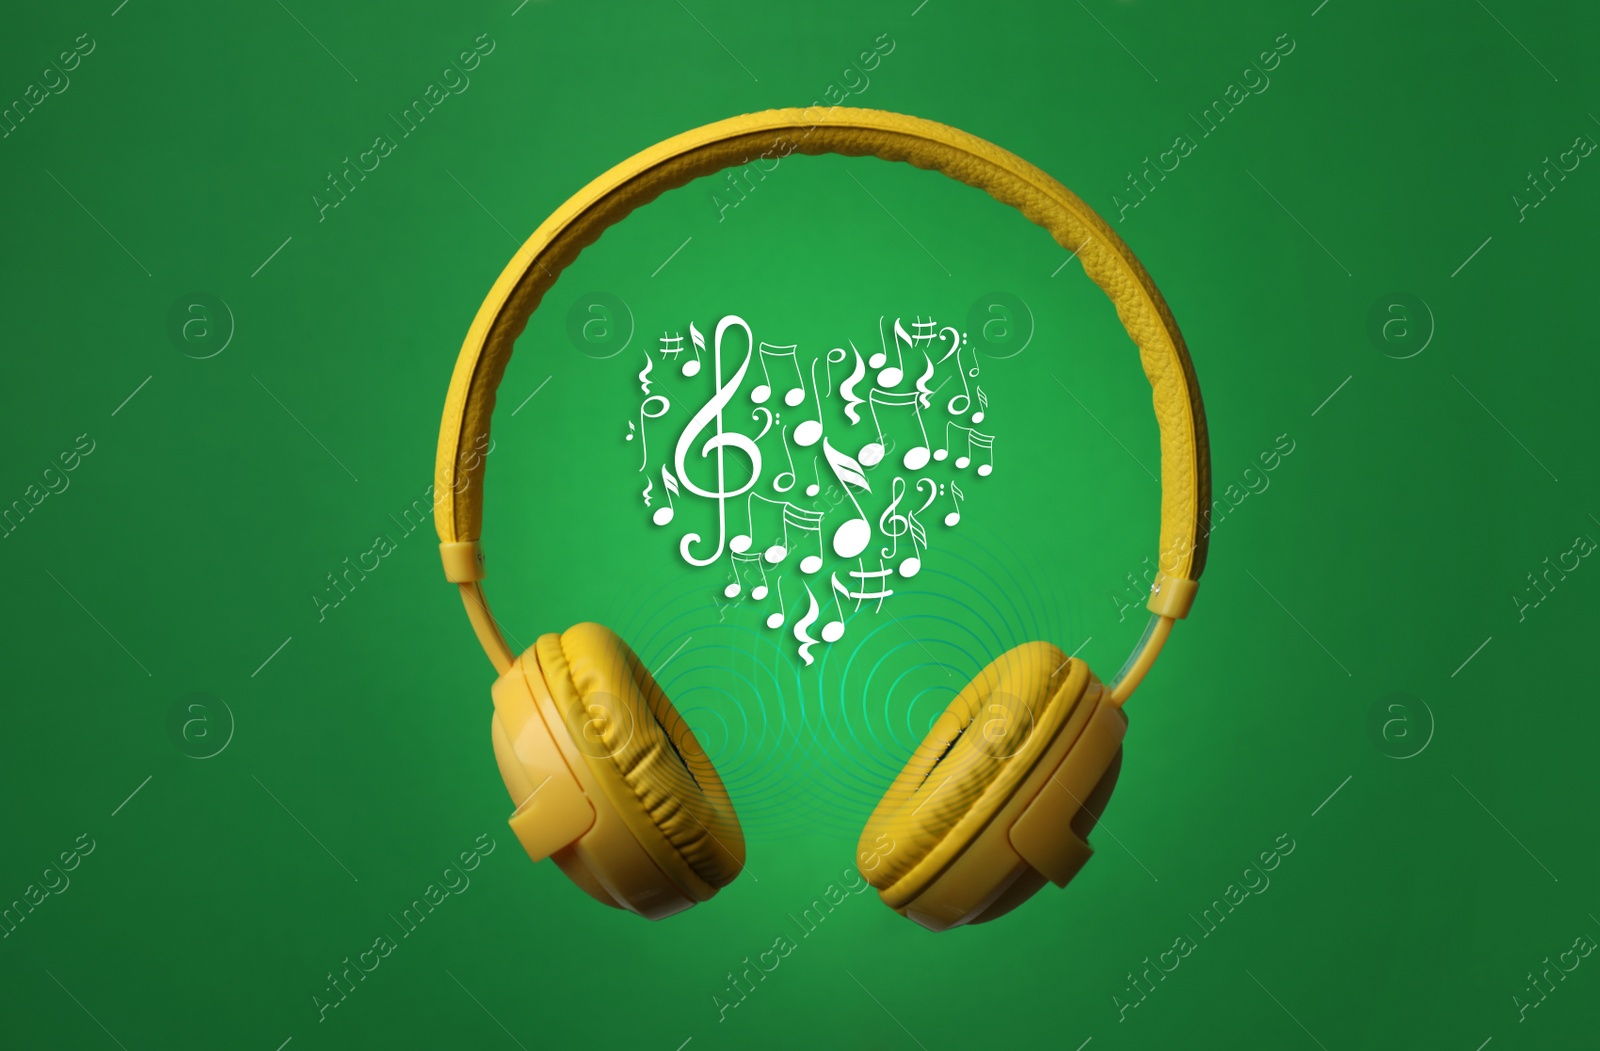 Image of Yellow headphones and heart shape made of music notes with treble clef on green background